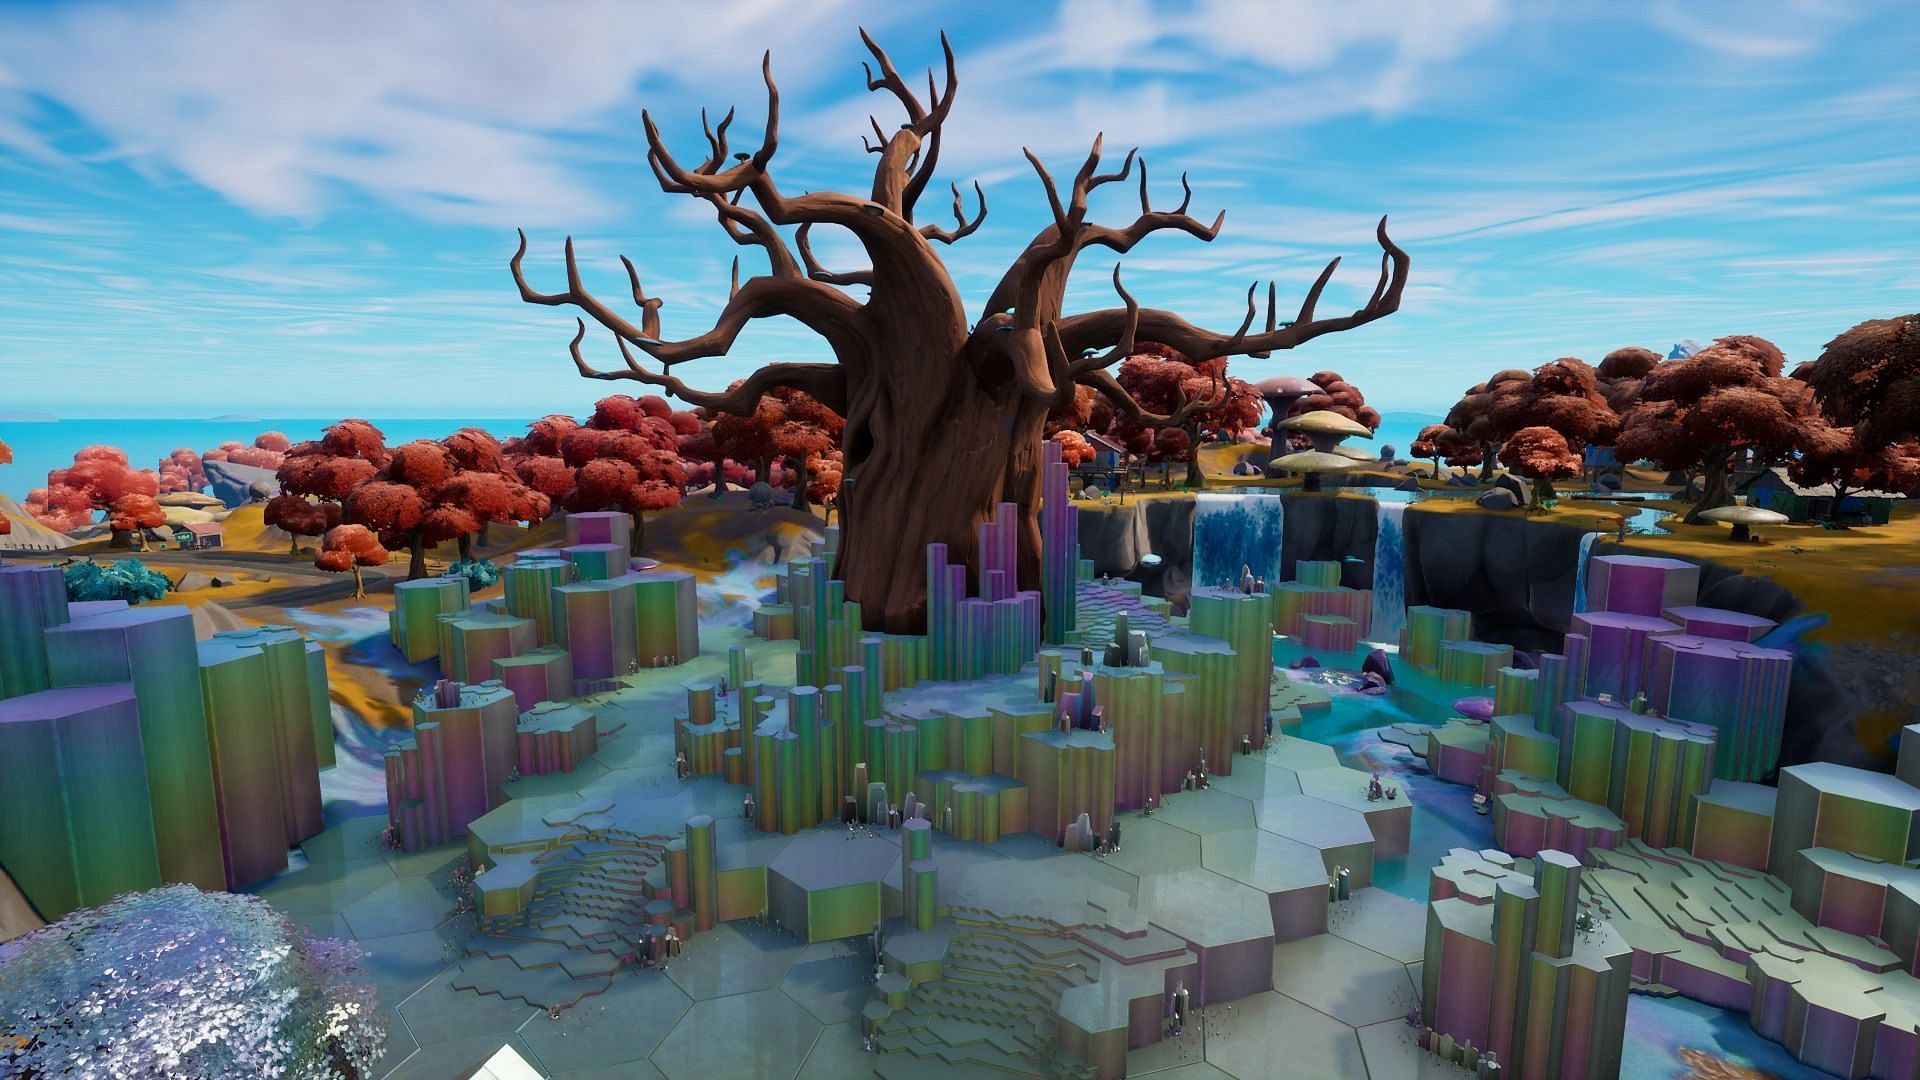 The Reality Tree may play a huge role in the upcoming live event (Image via Epic Games)